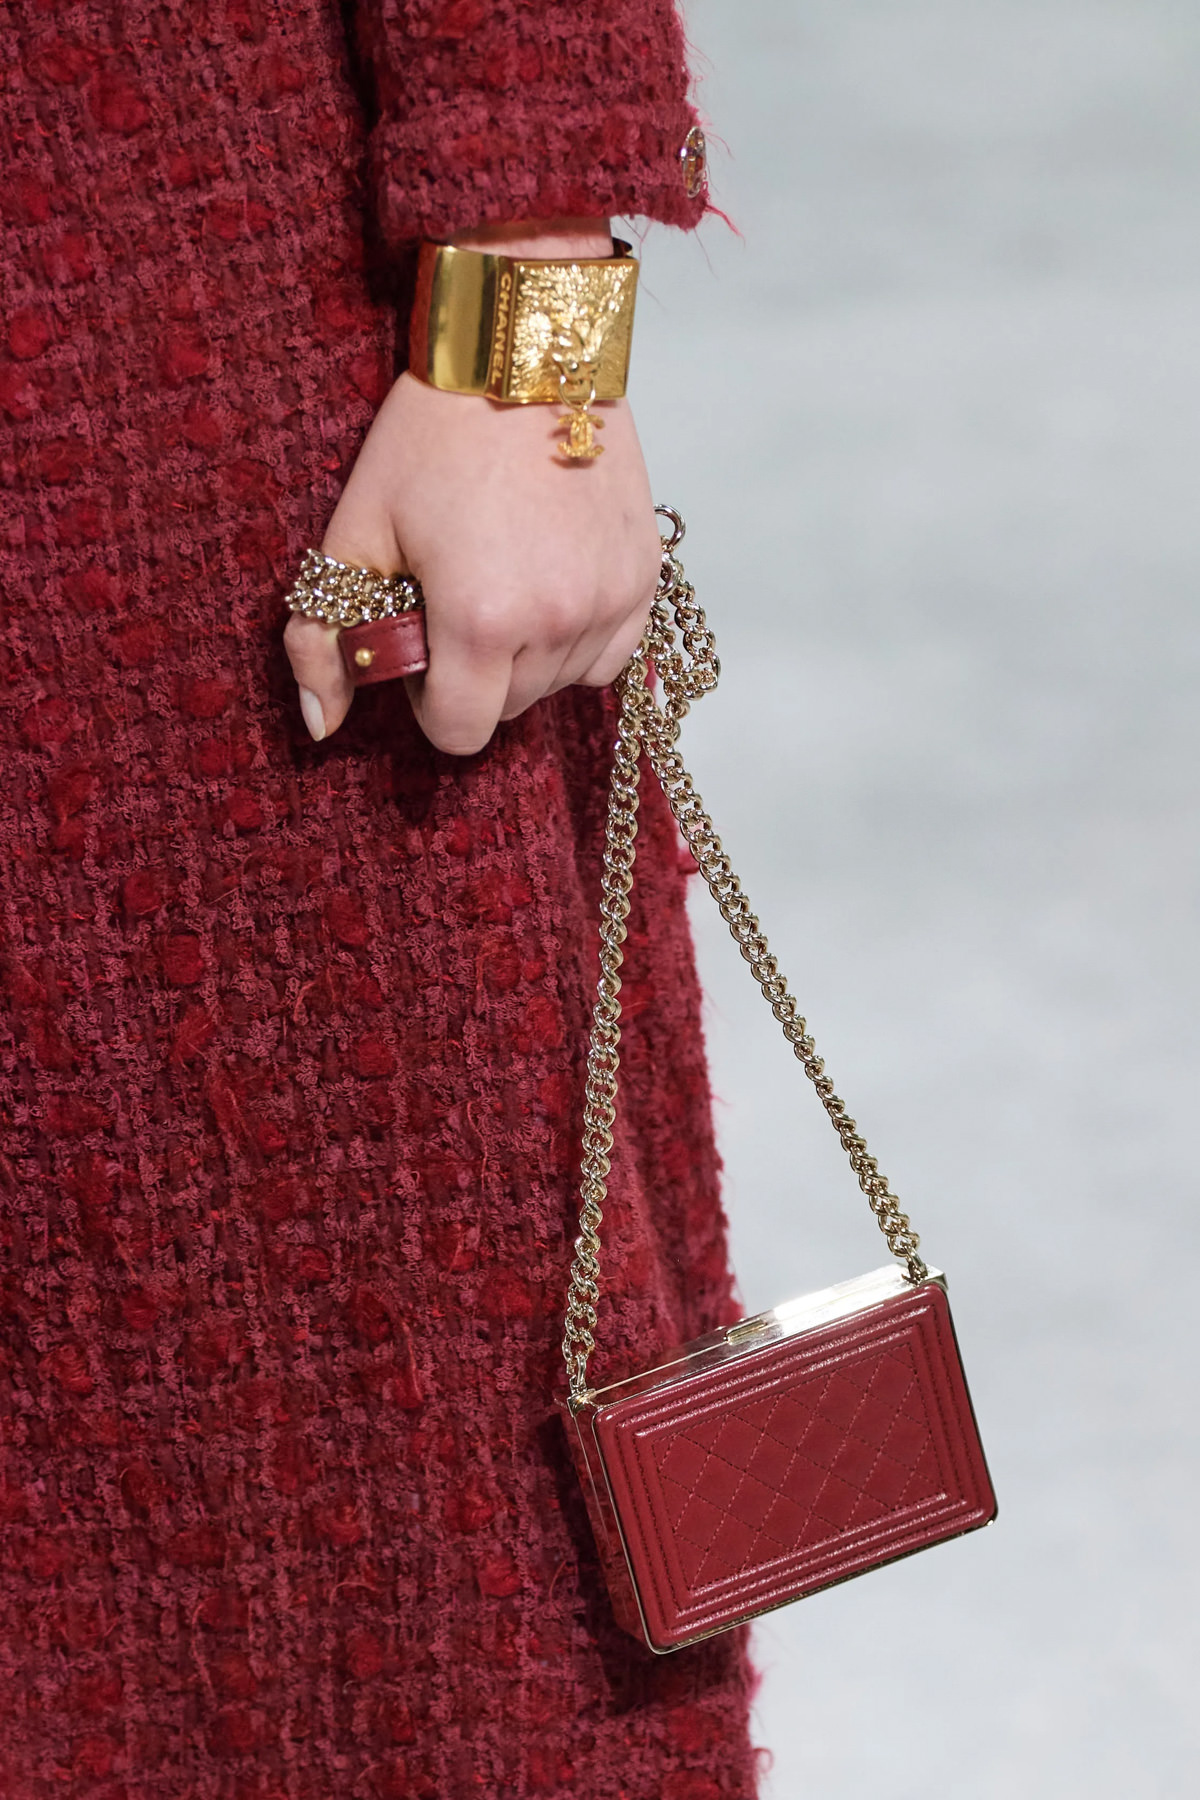 Small leather goods of the 2021/22 Métiers d'art CHANEL Fashion